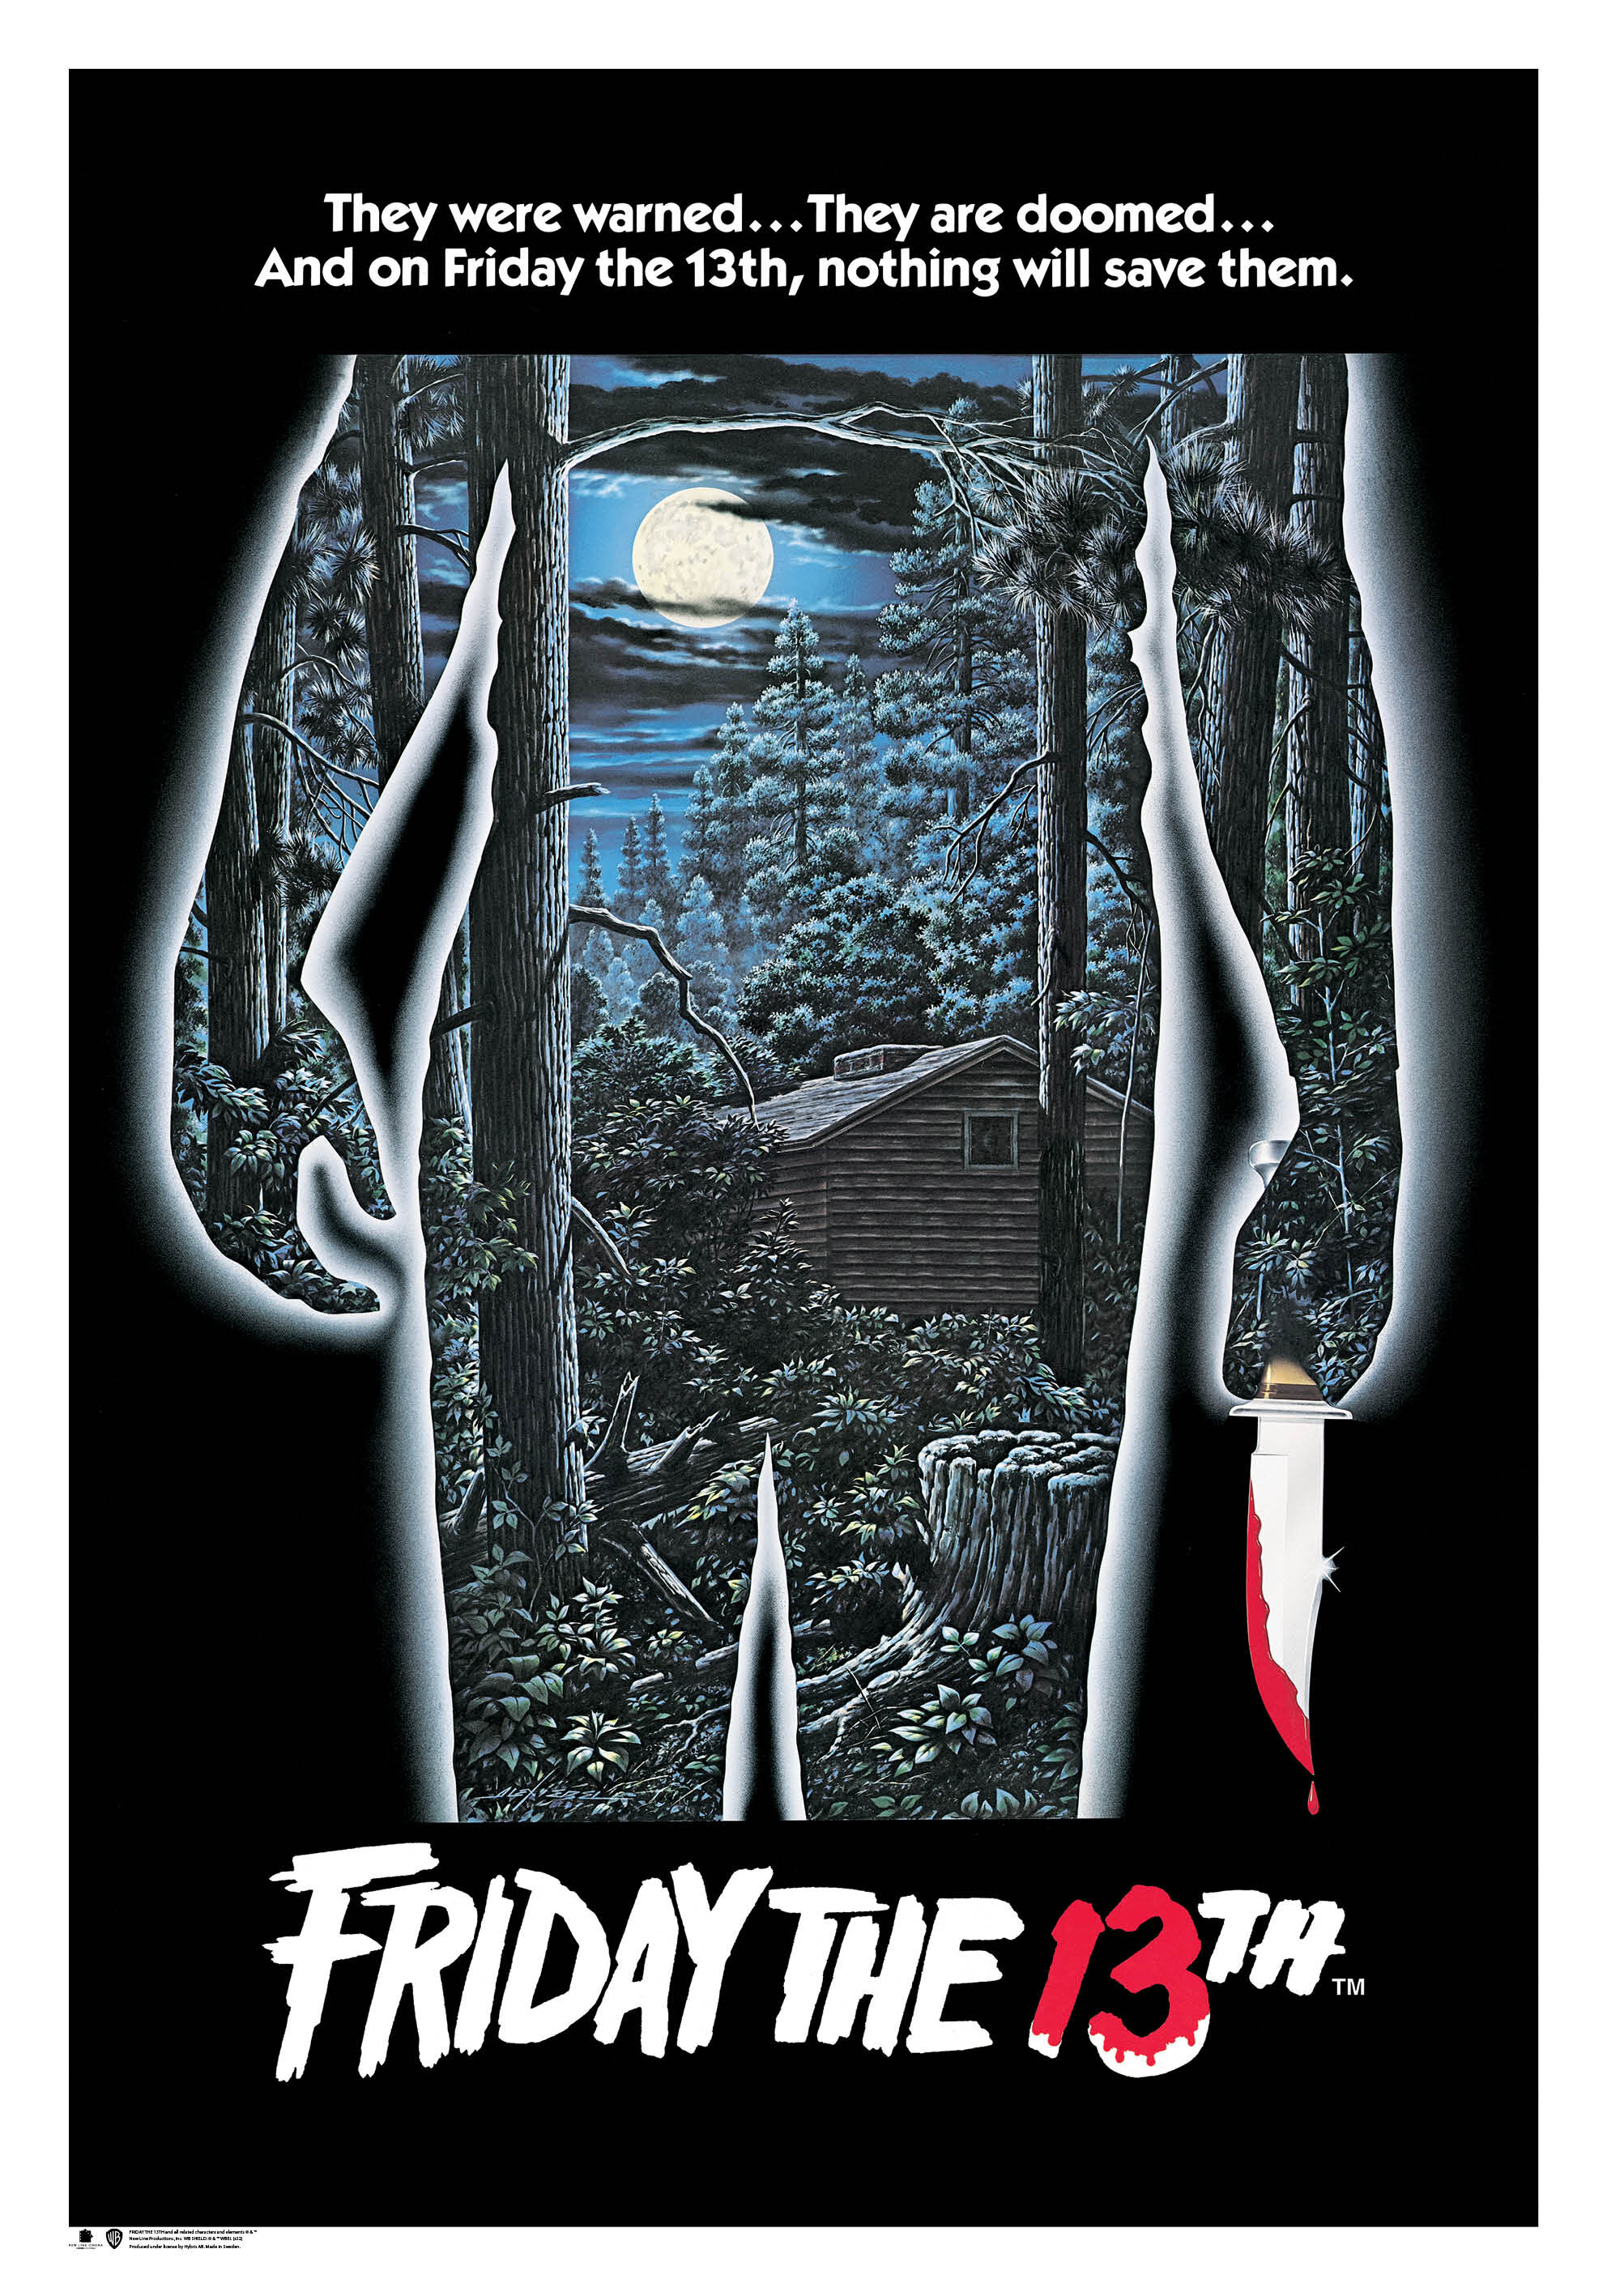 Friday The 13th - Nothing Will Save Them Poster